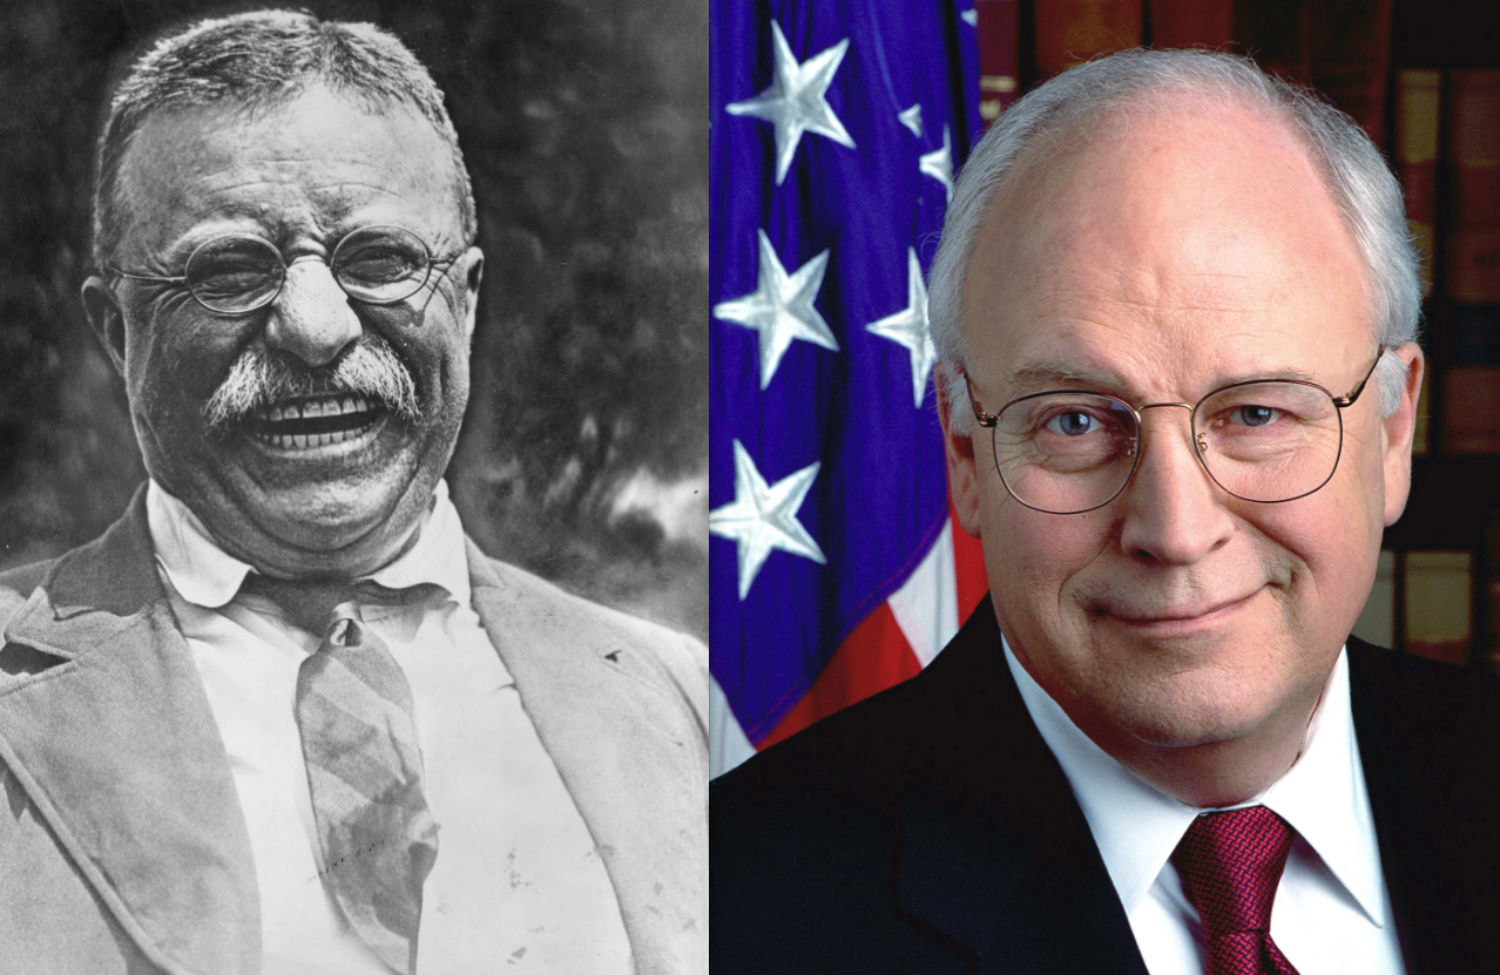 Dick Cheney Goes All Teddy Roosevelt on Obama and Iraq